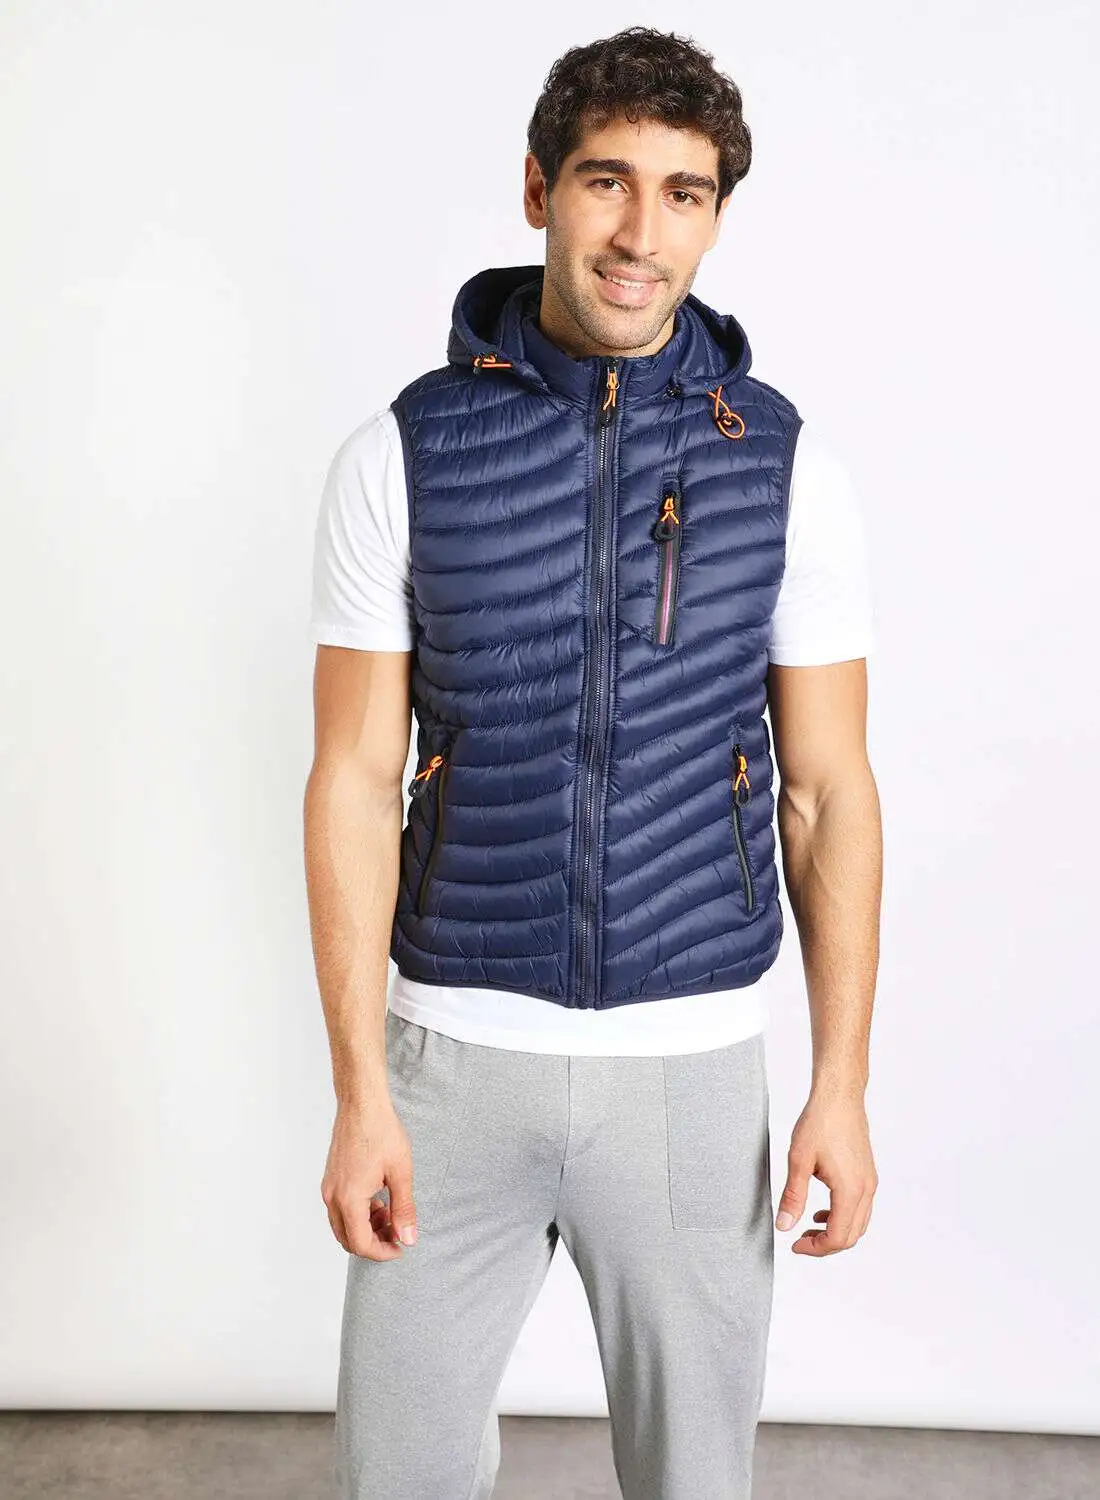 Athletiq Men's Casual Hooded And Side Pockets Detail Puffer Vest Jacket Royal